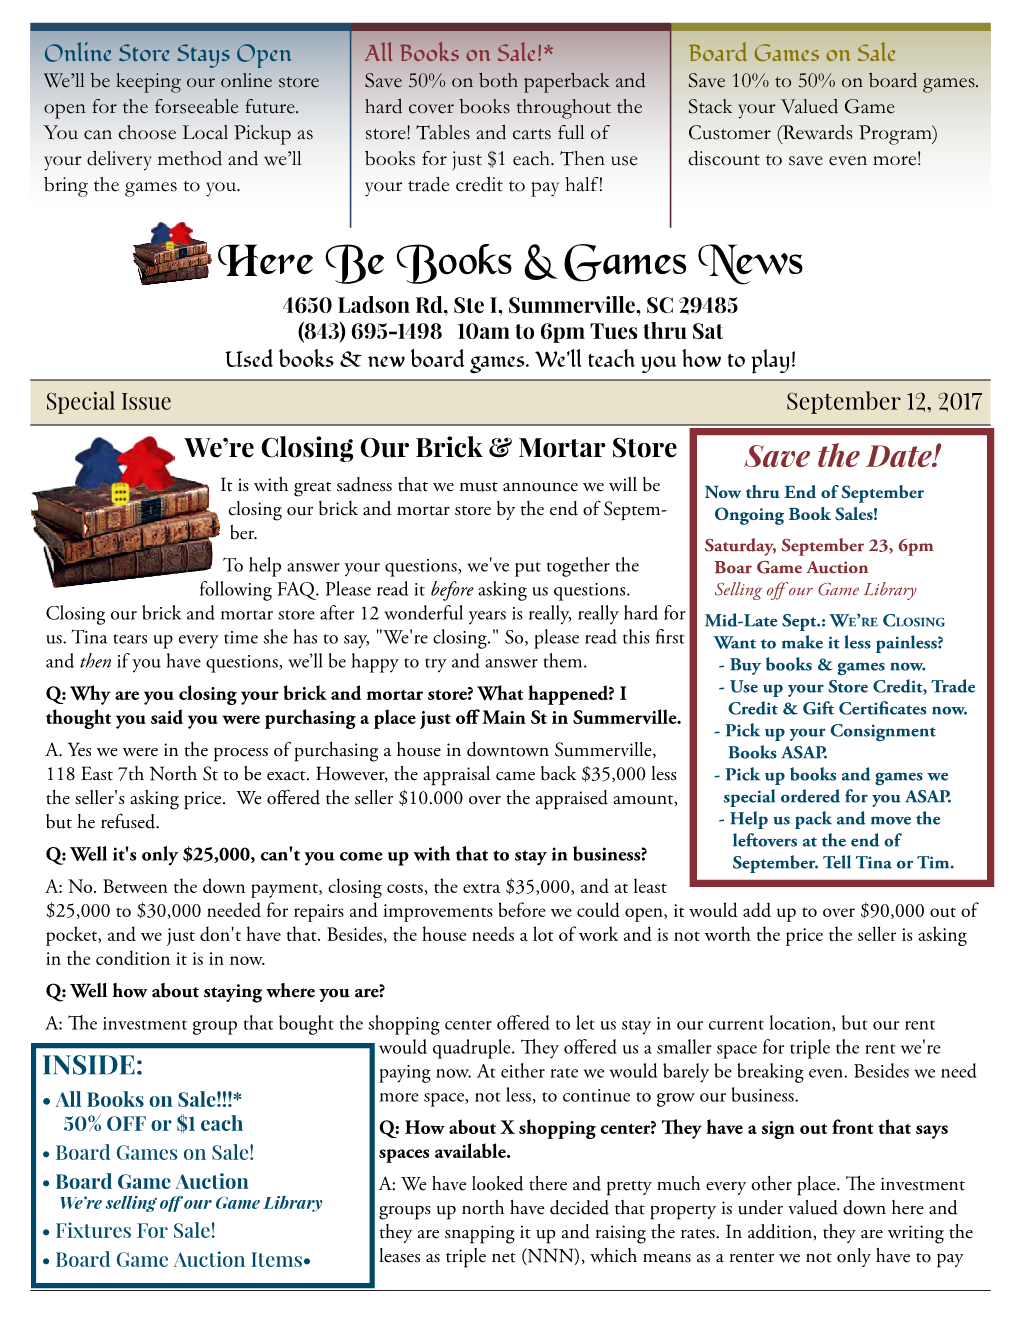 Here Be Books & Games News